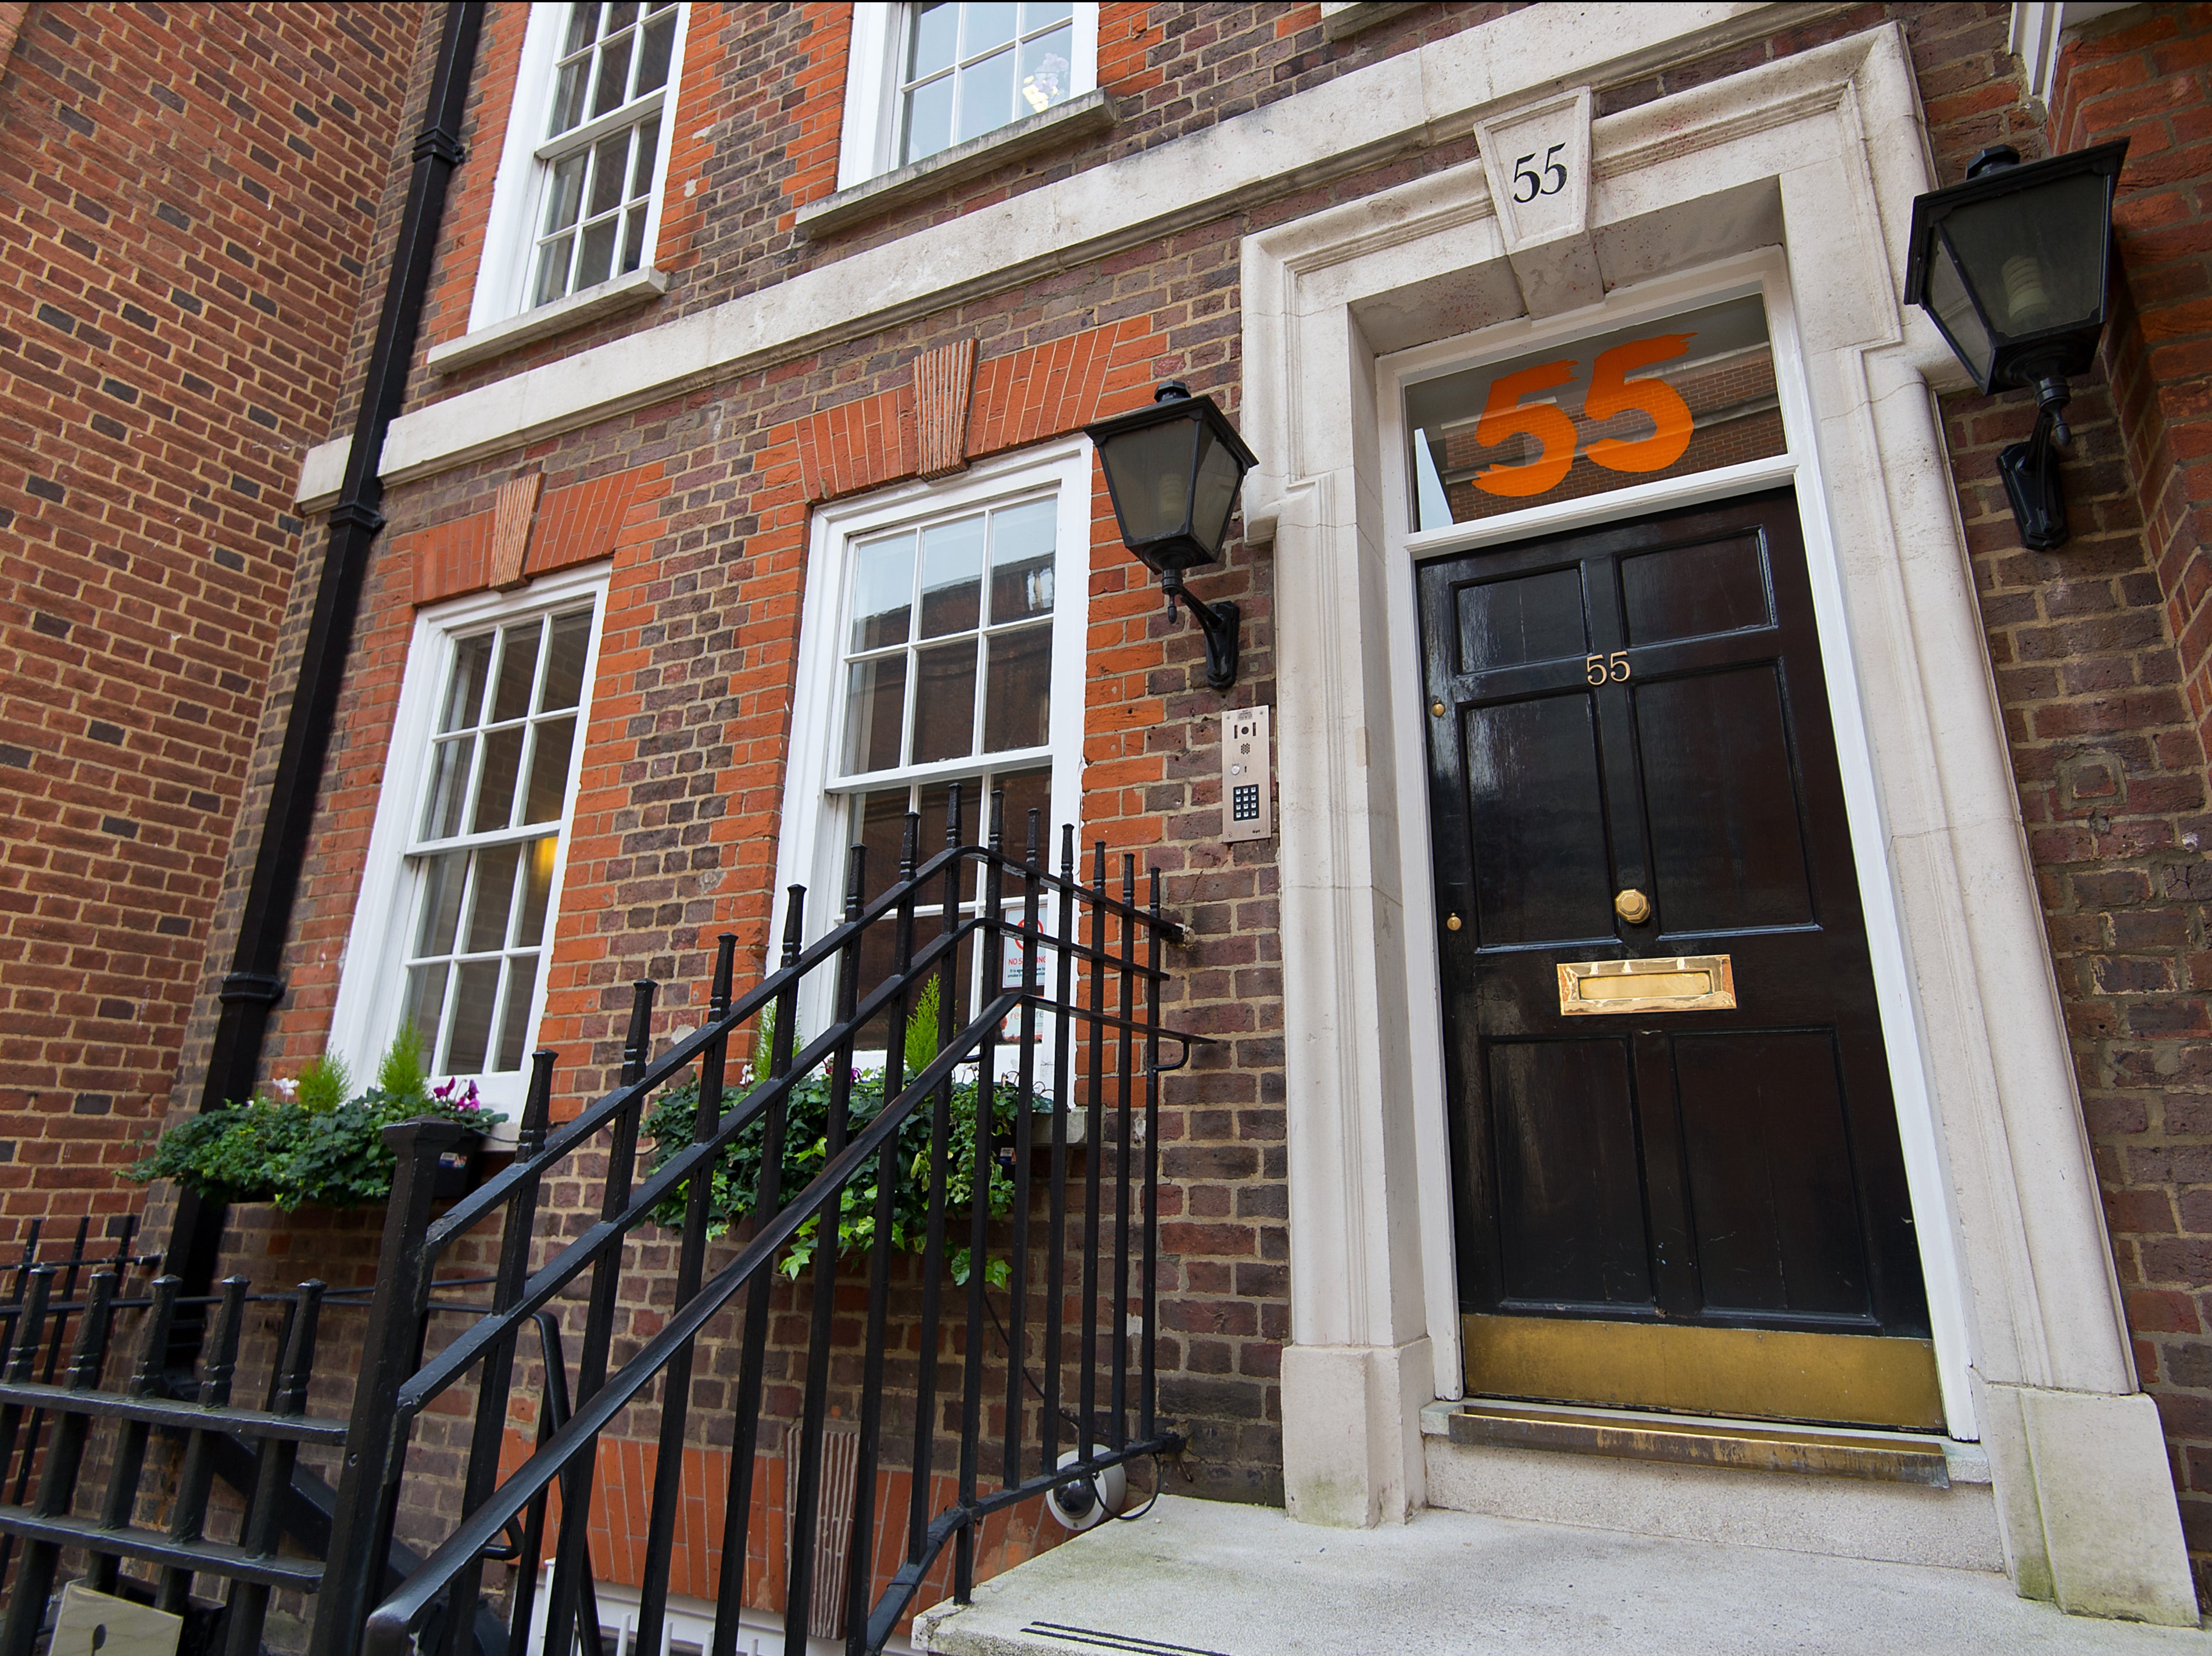 55 Tuft Street, London, home to Global Warming Policy Foundation